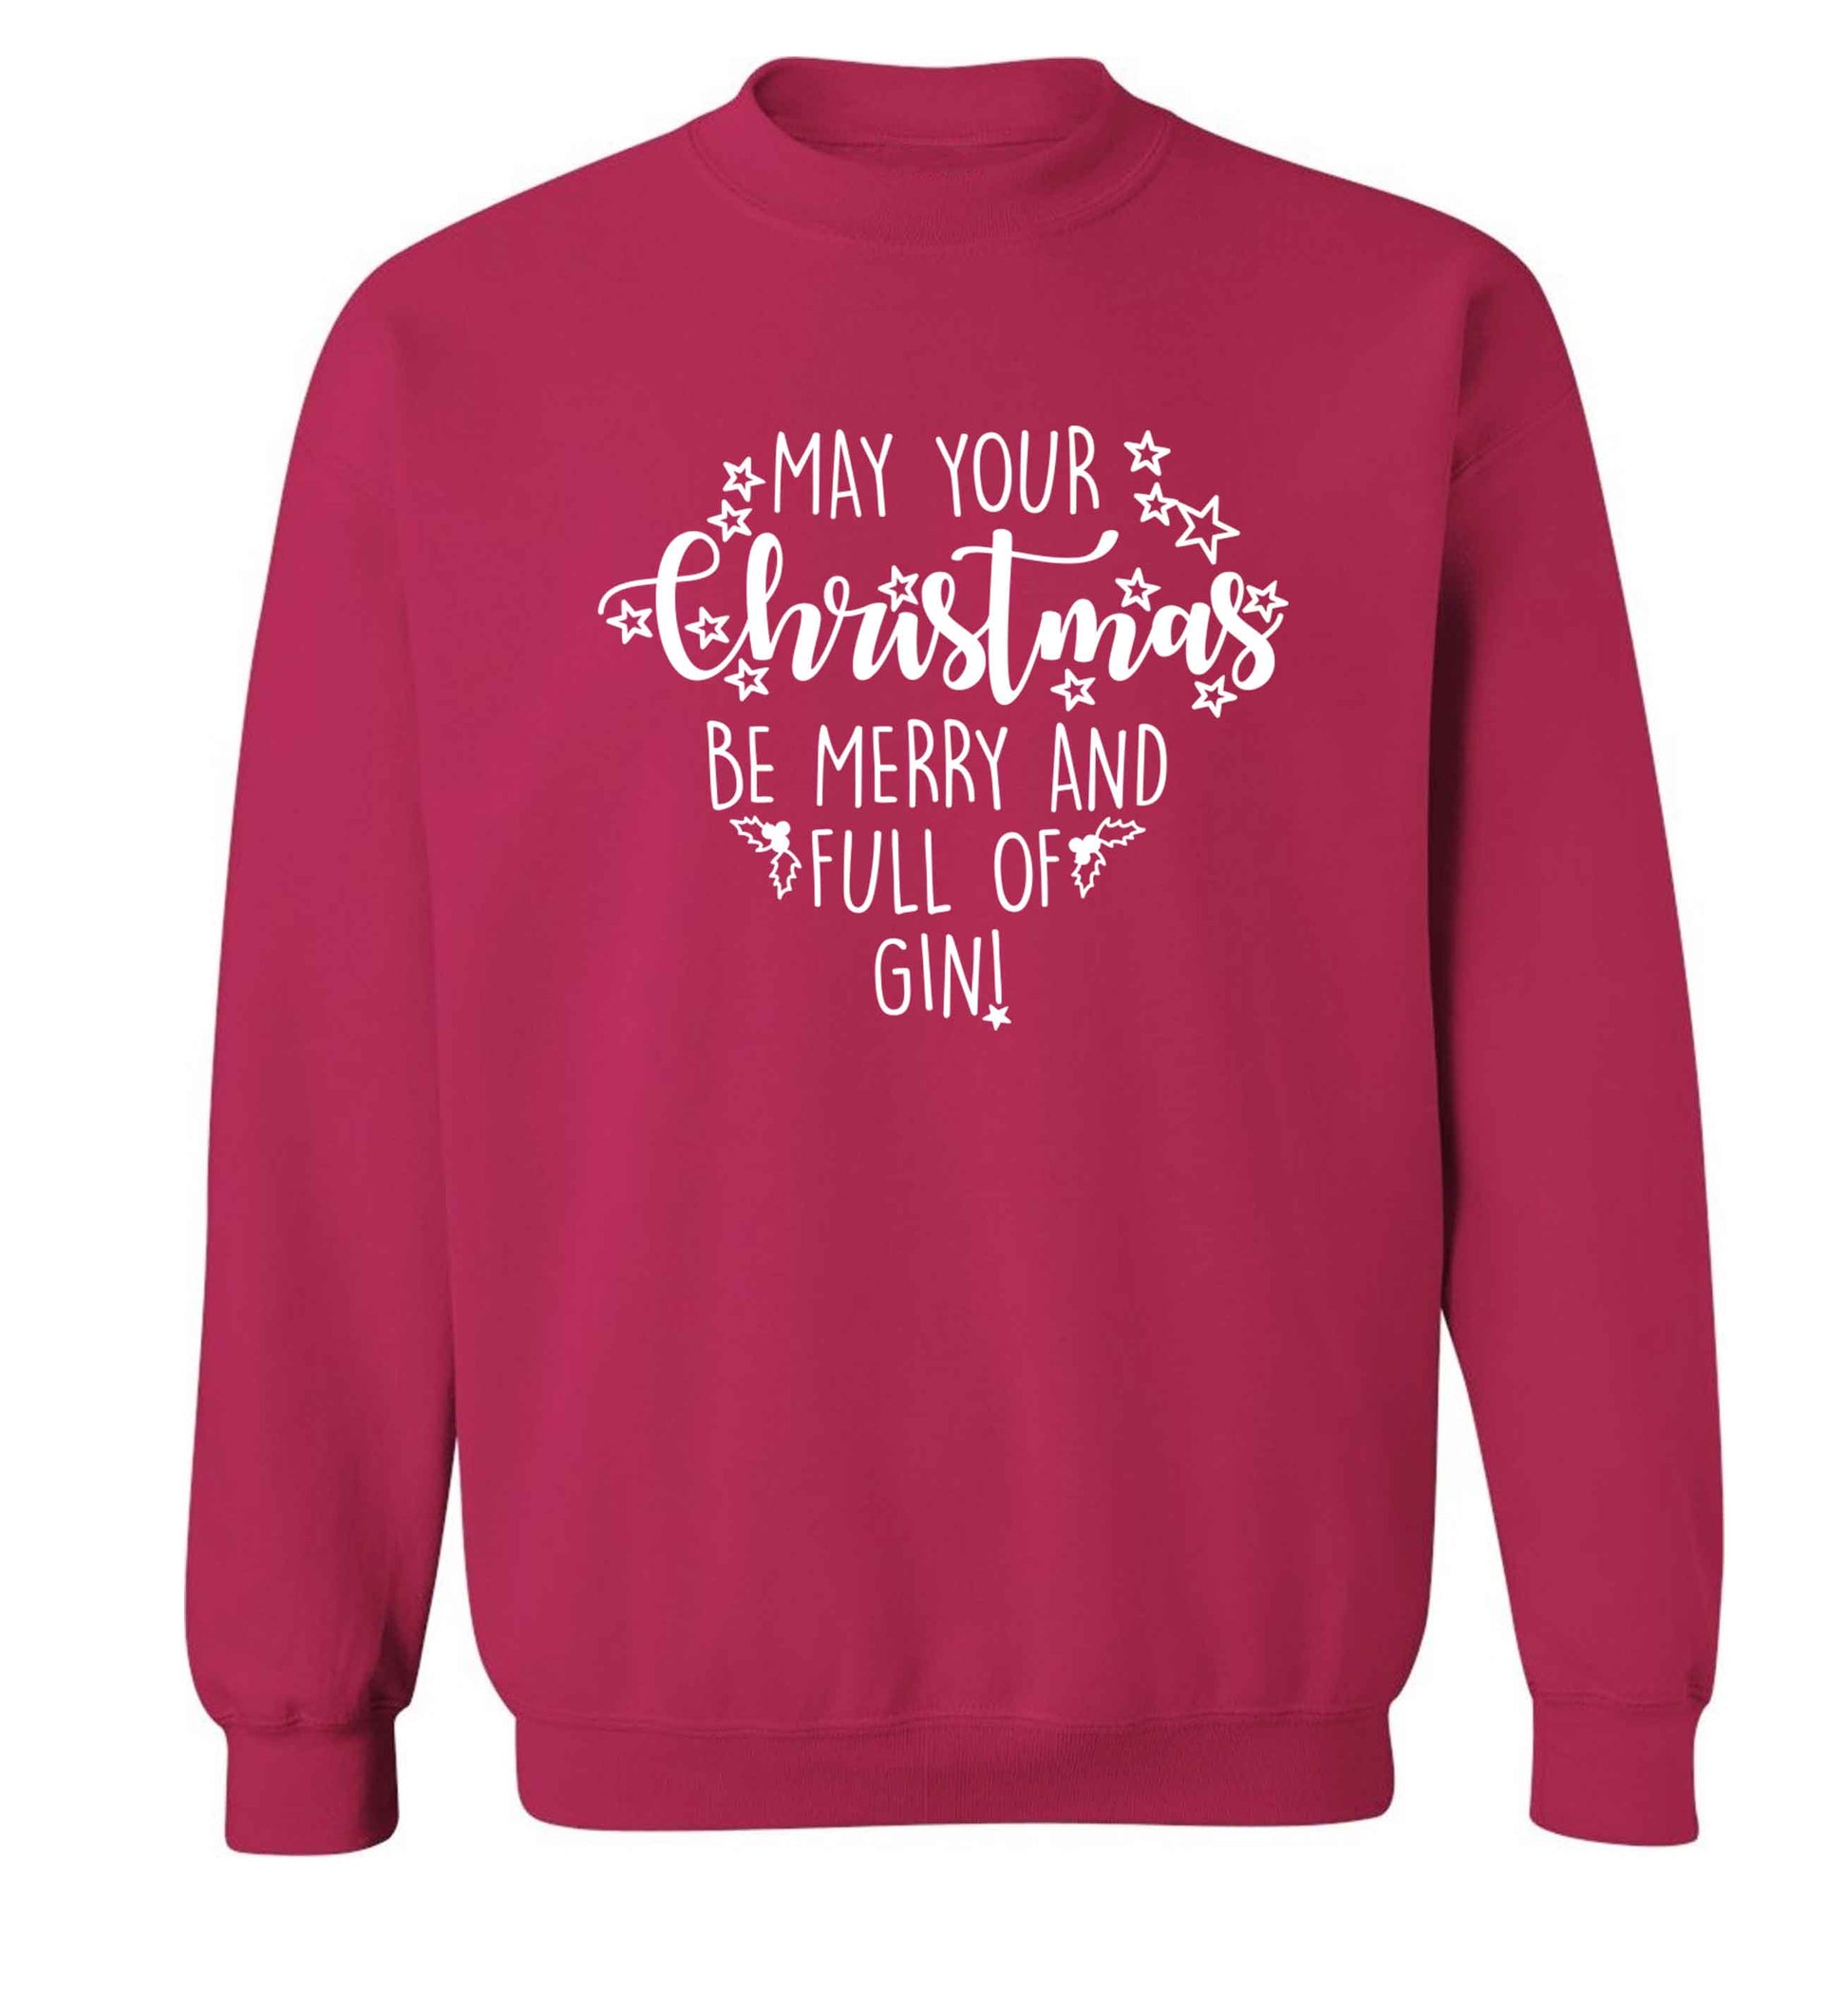 May your Christmas be merry and full of gin Adult's unisex pink Sweater 2XL